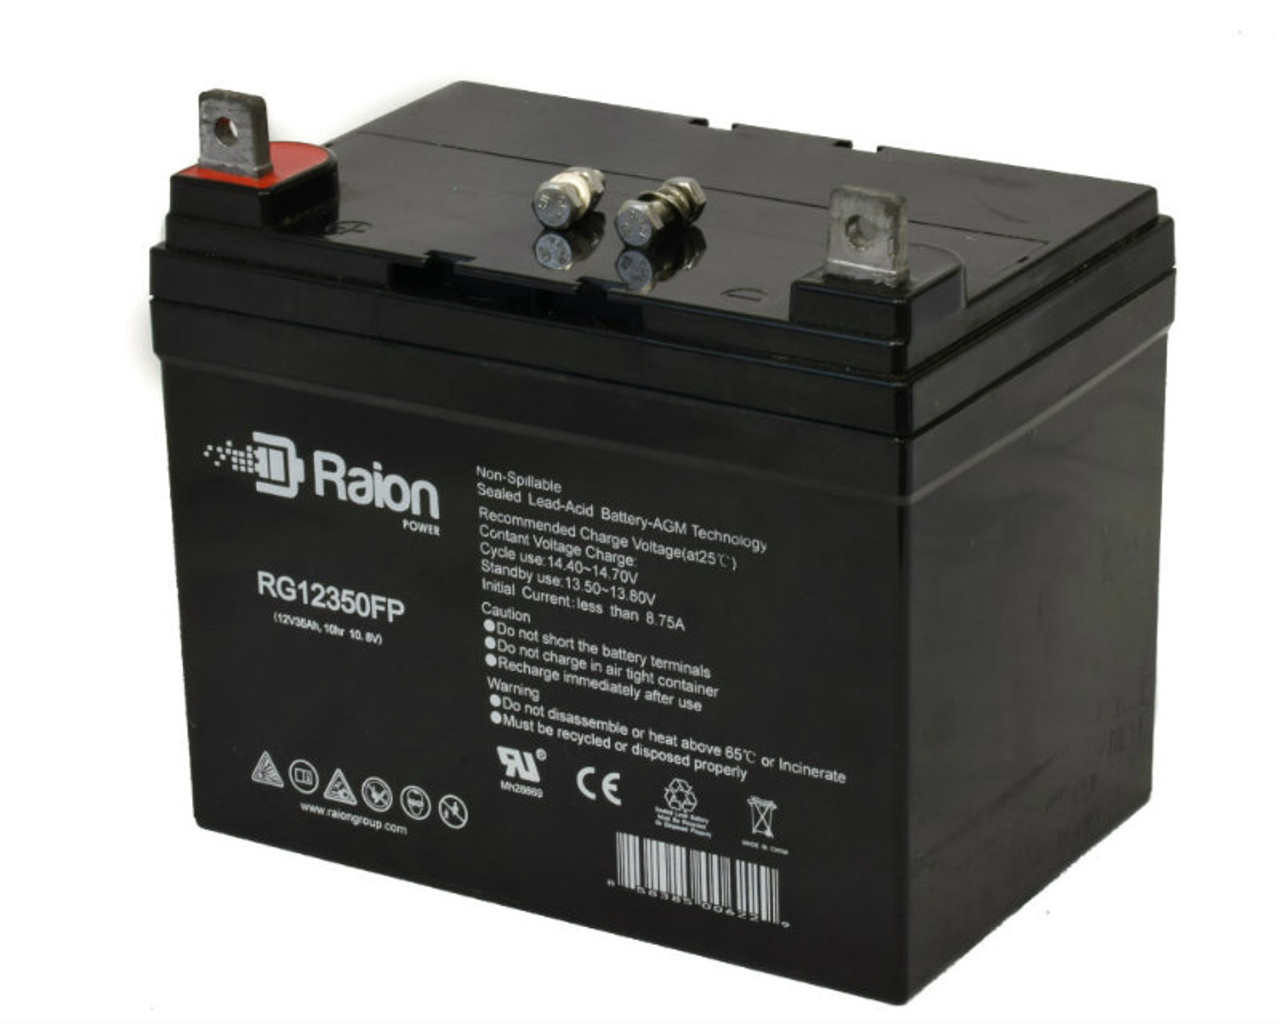 Raion Power Replacement 12V 35Ah RG12350FP Mobility Scooter Battery for Fortress Scooters 1700SP